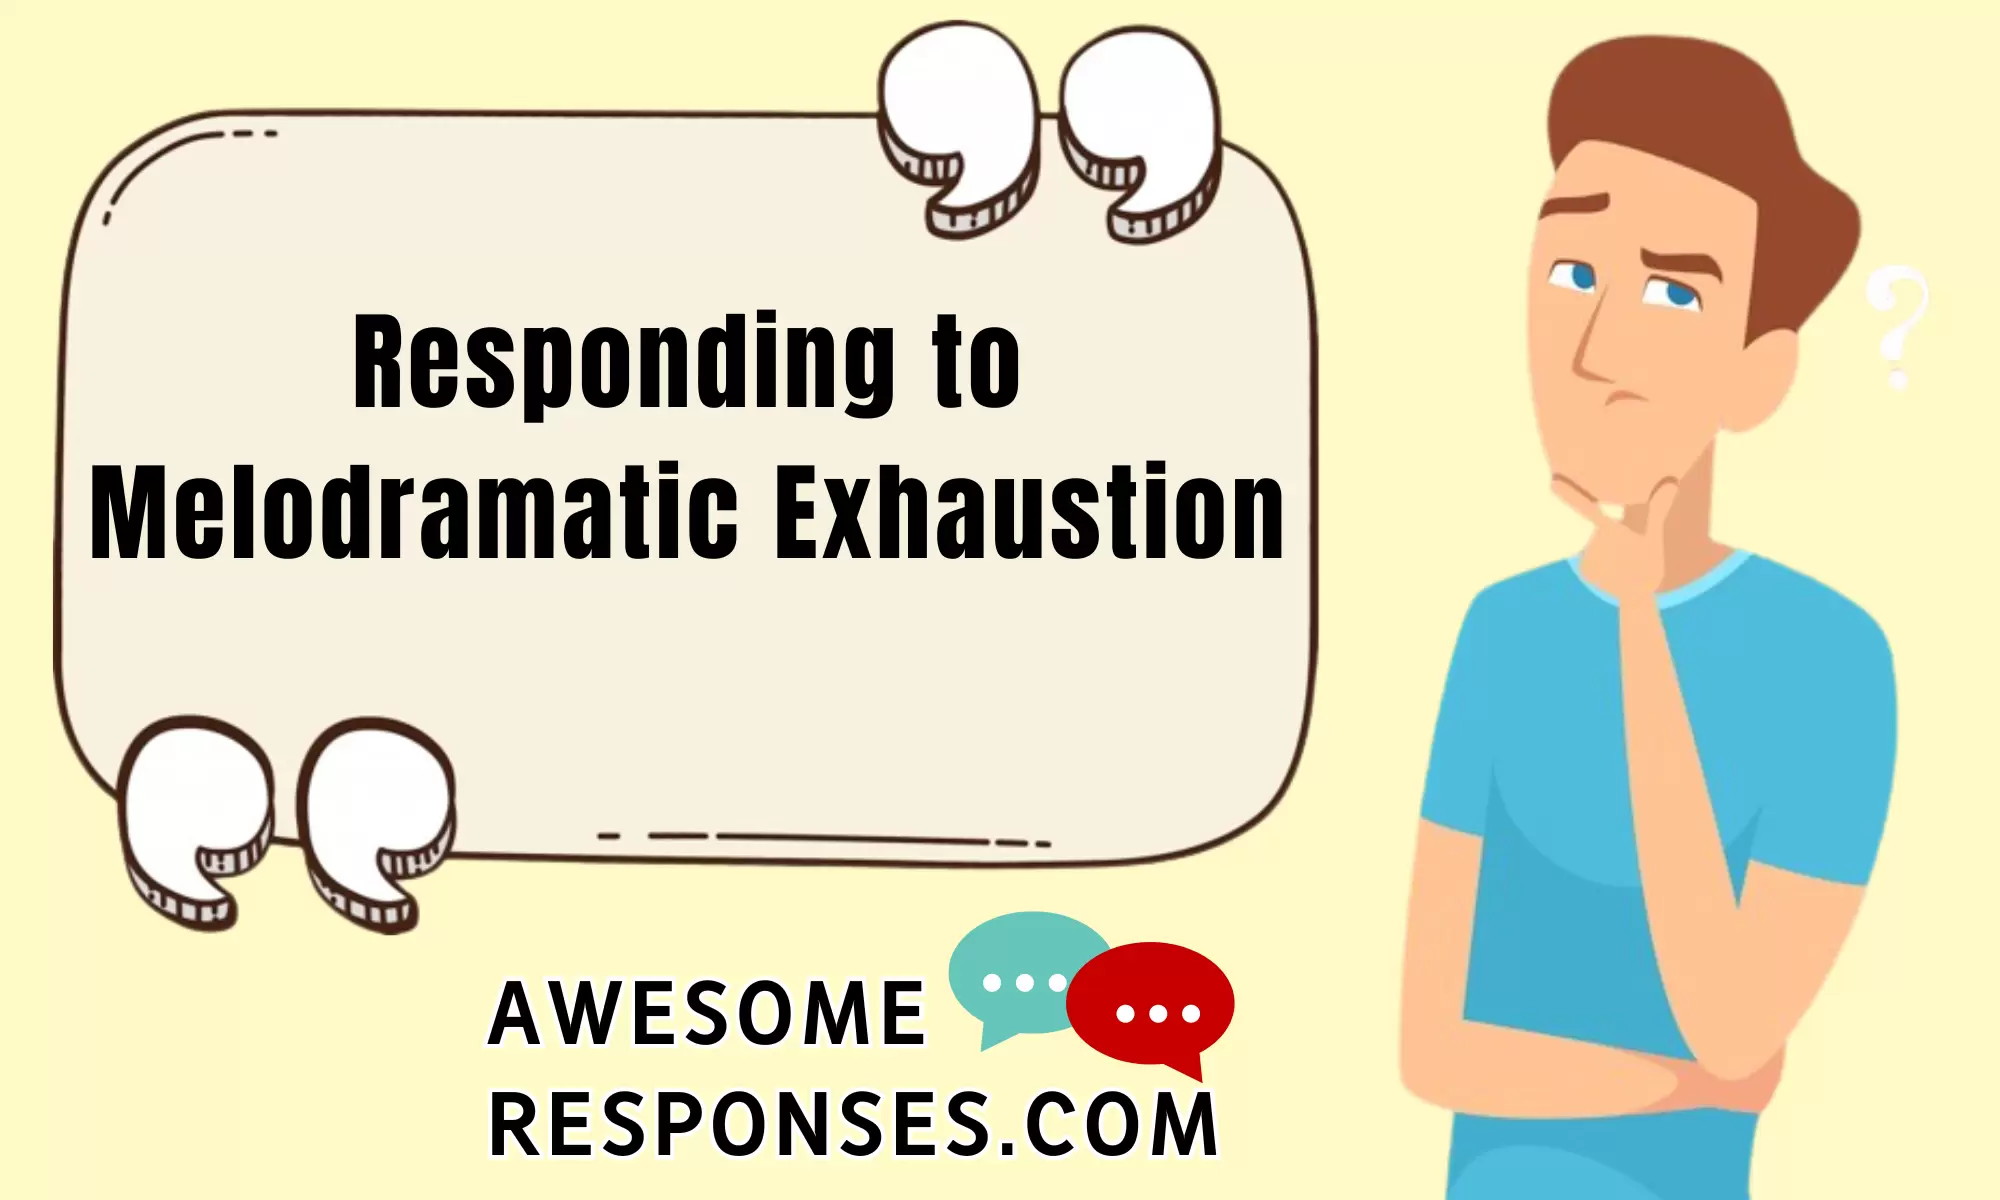 Responding to Melodramatic Exhaustion